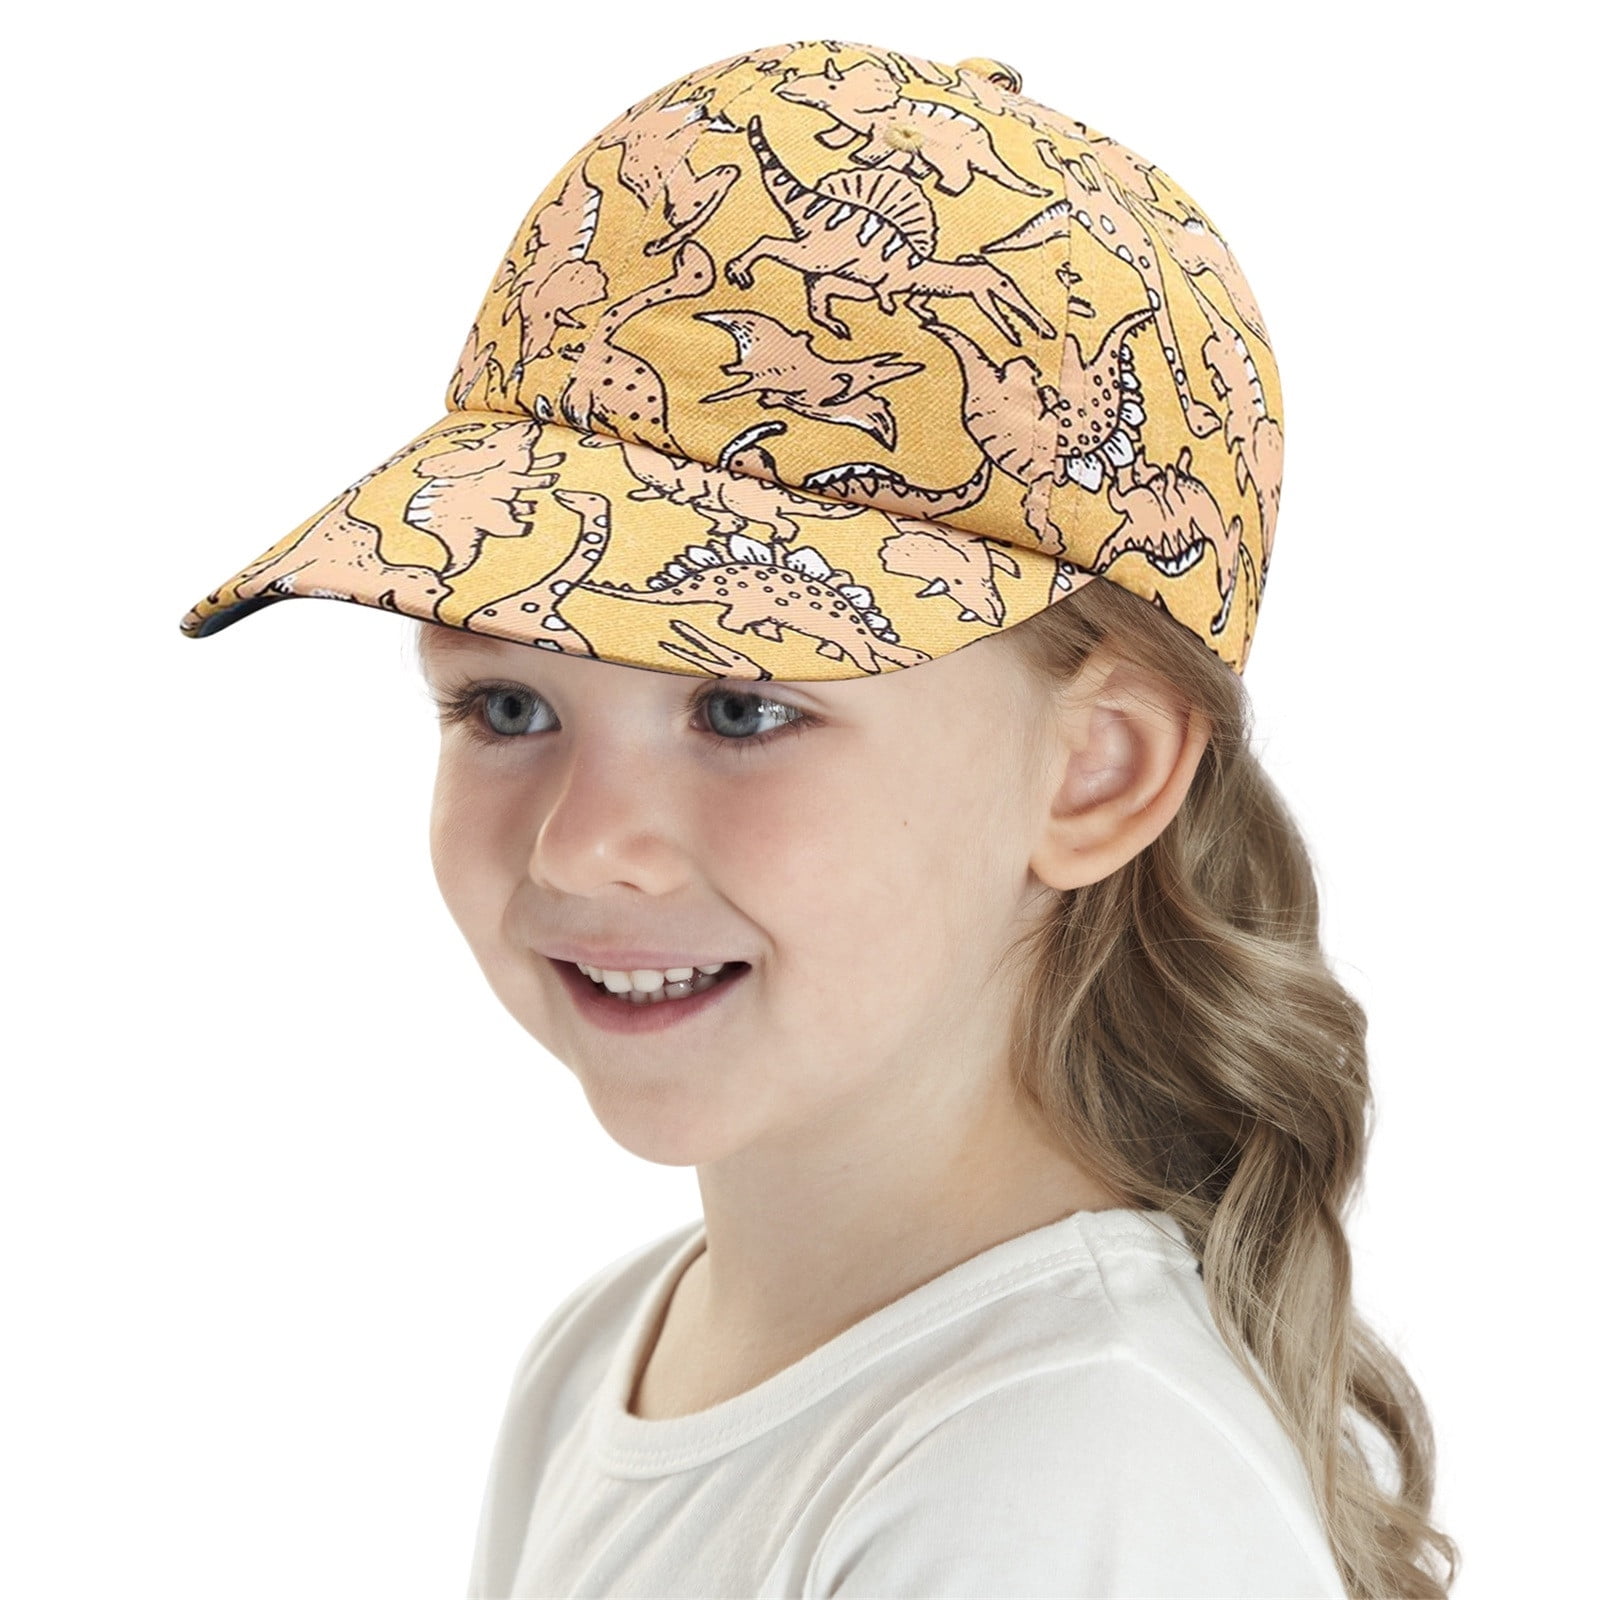 childrens waterproof hats - OFF-65% > Shipping free